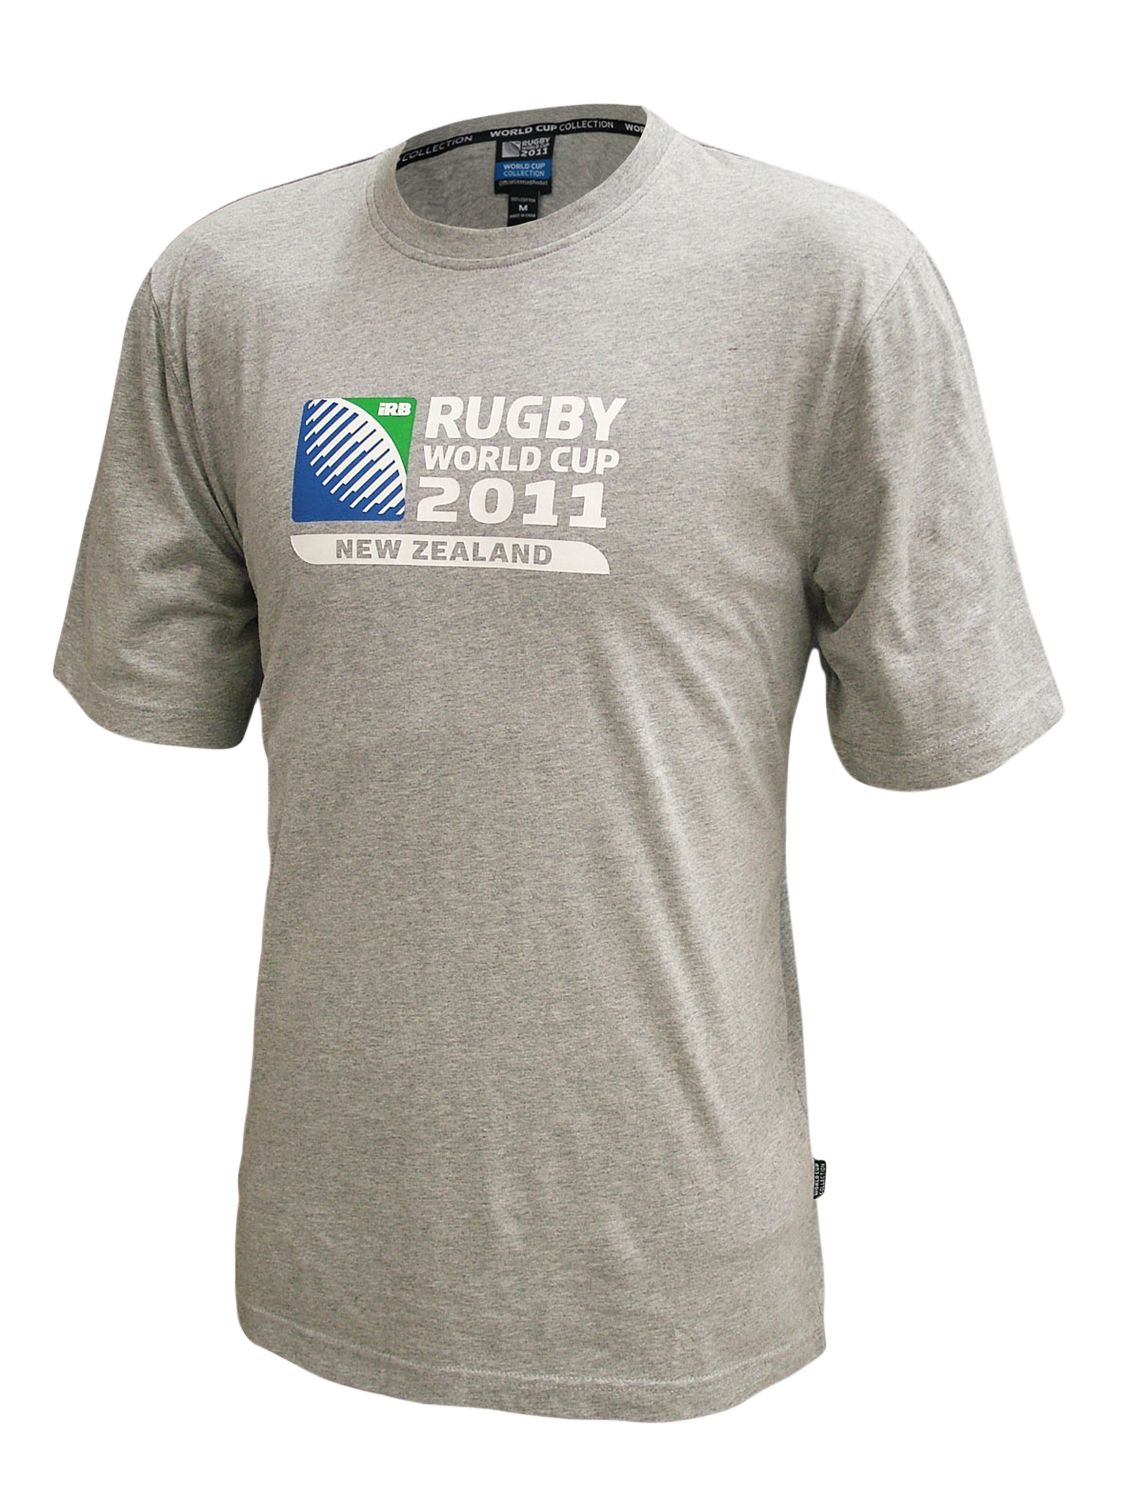 Rugby World Cup 2011 Event Logo T-Shirt, Grey marl